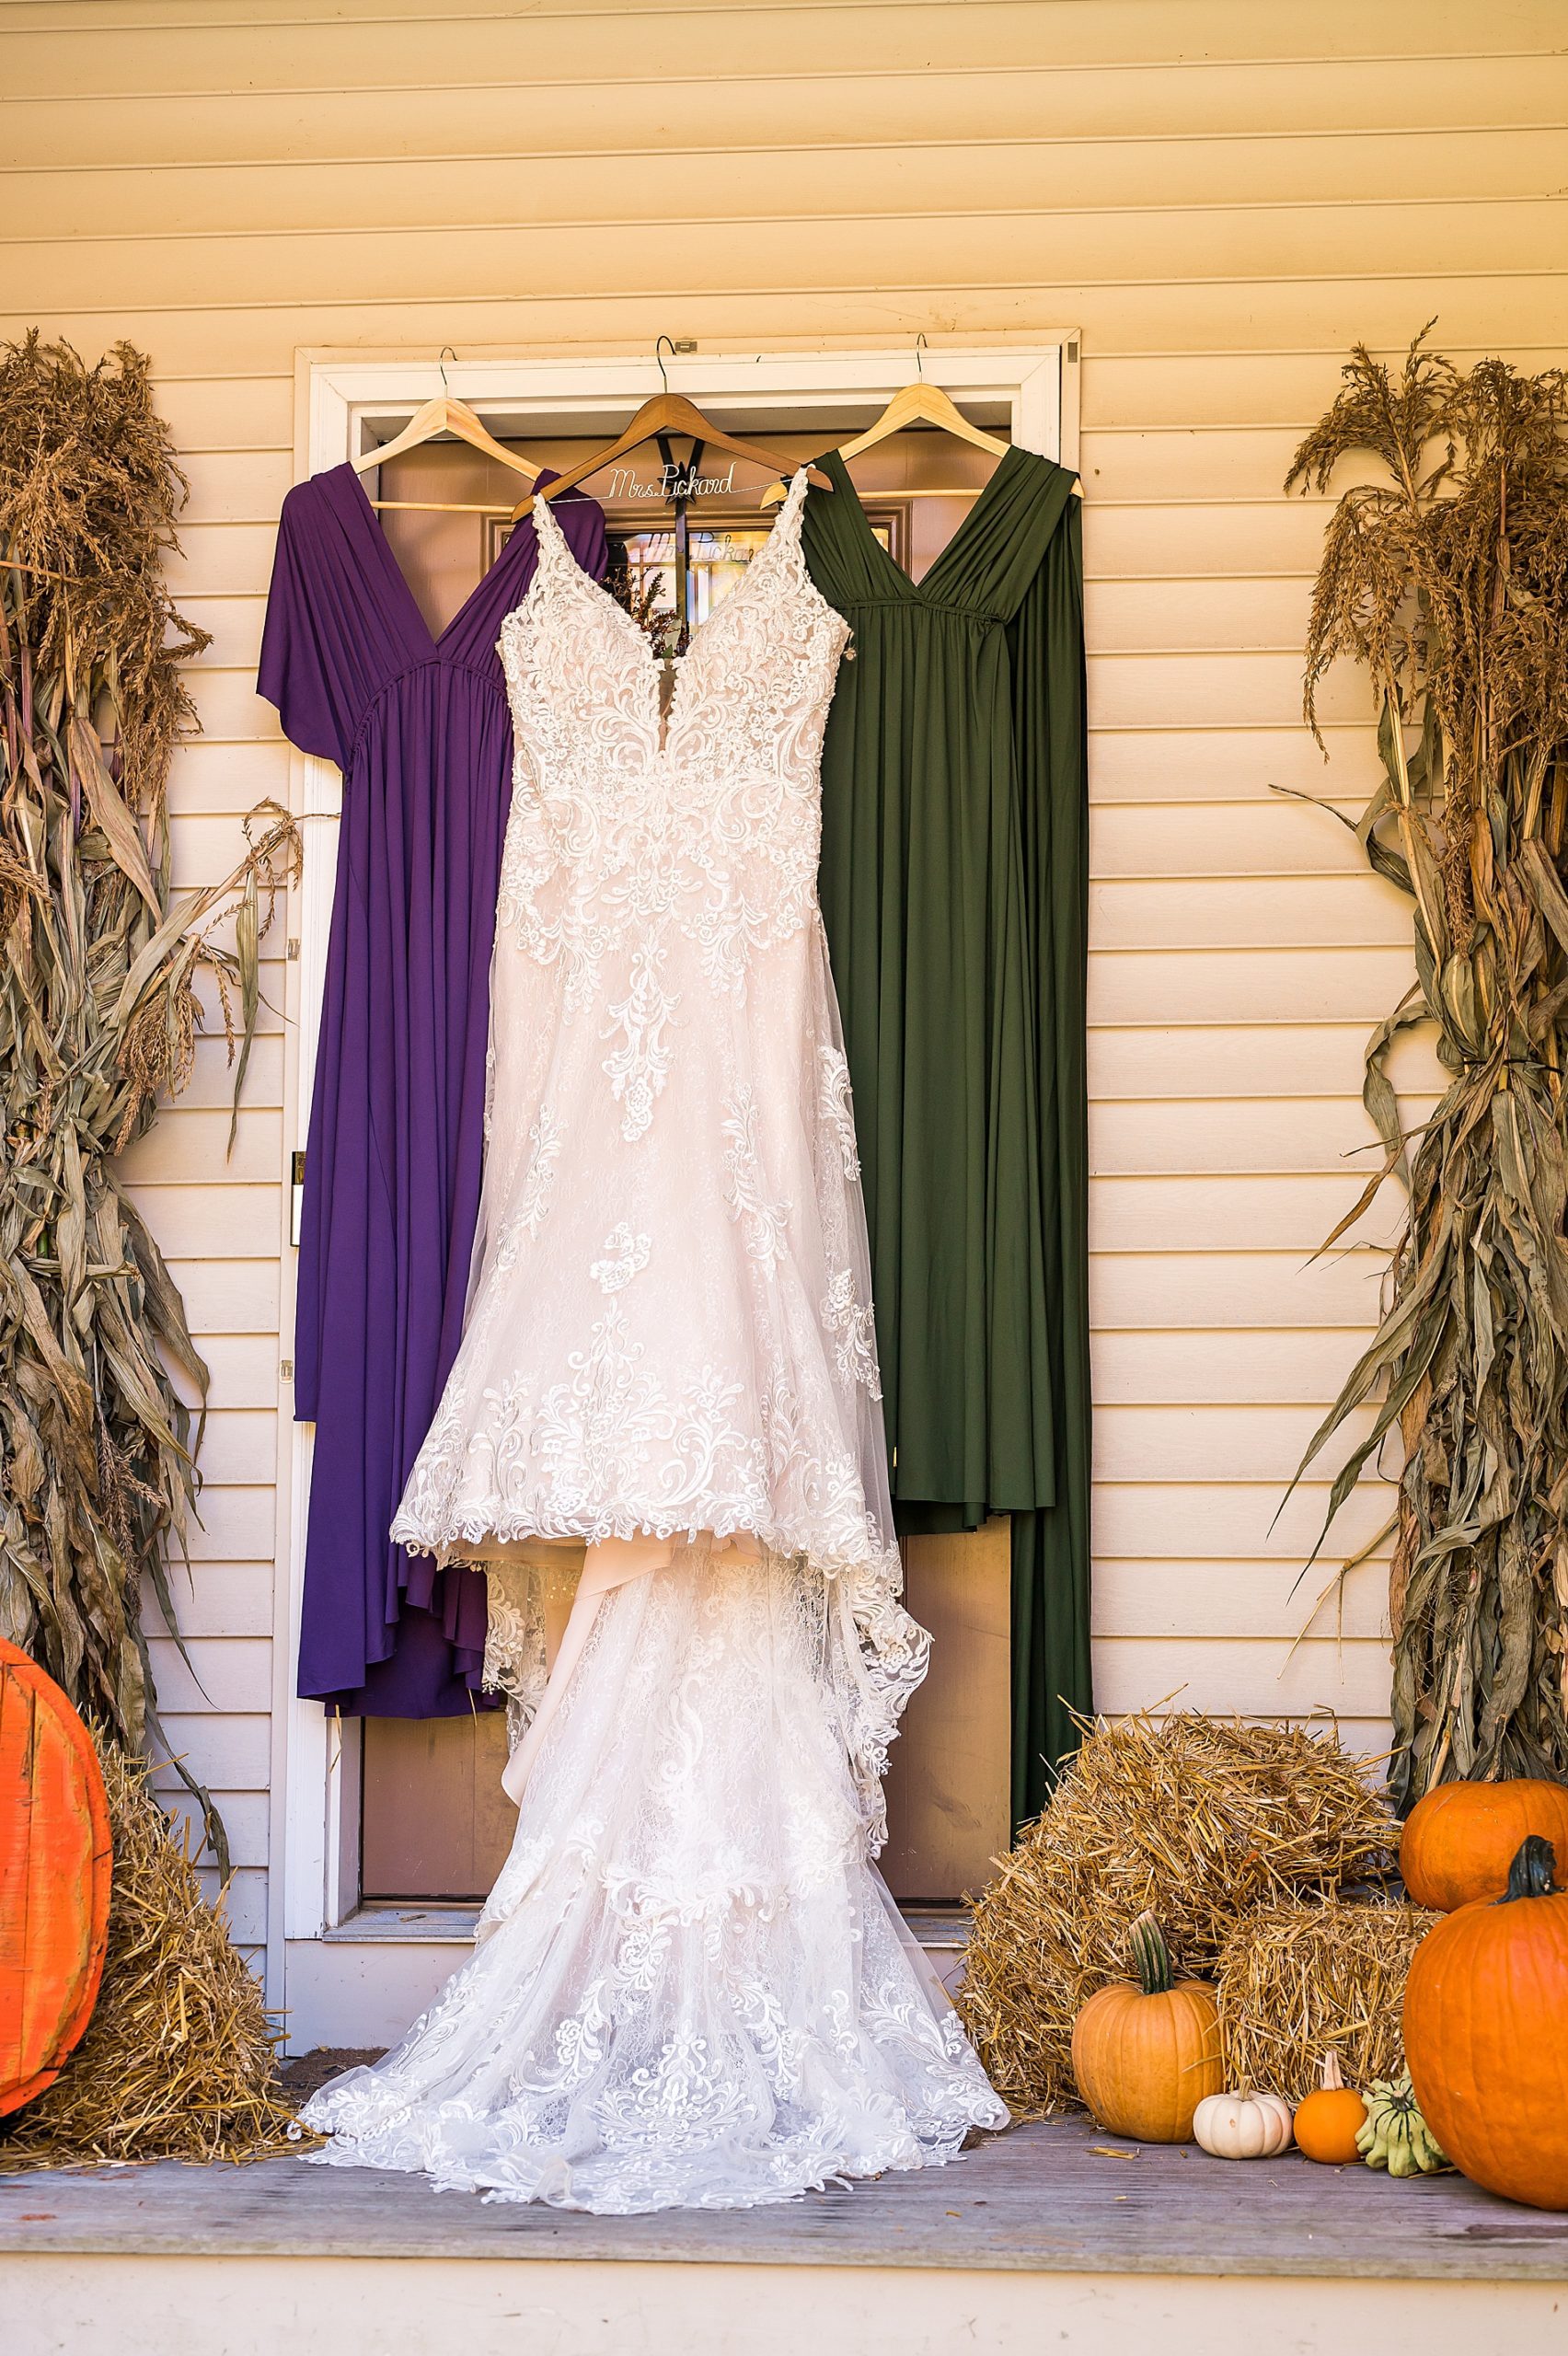 wedding dress and bridesmaids dresses from fall wedding